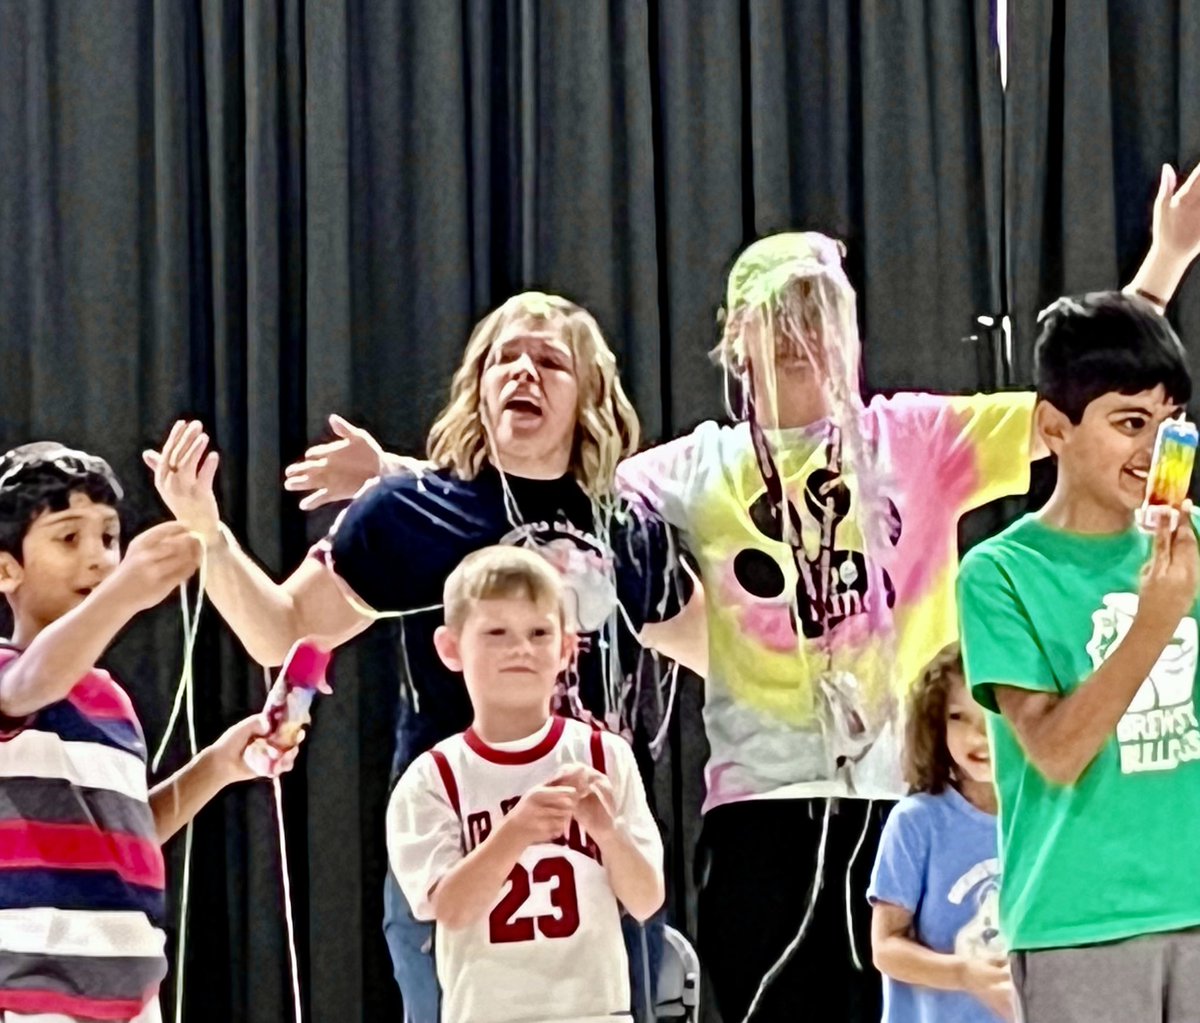 A great week of celebrating staff, teachers, and finding joy daily with our students! Thanks Ms.Z for the awesome assembly-P2 character strength, perseverance, and celebration of others’ community service through fundraising brought us all joy!!